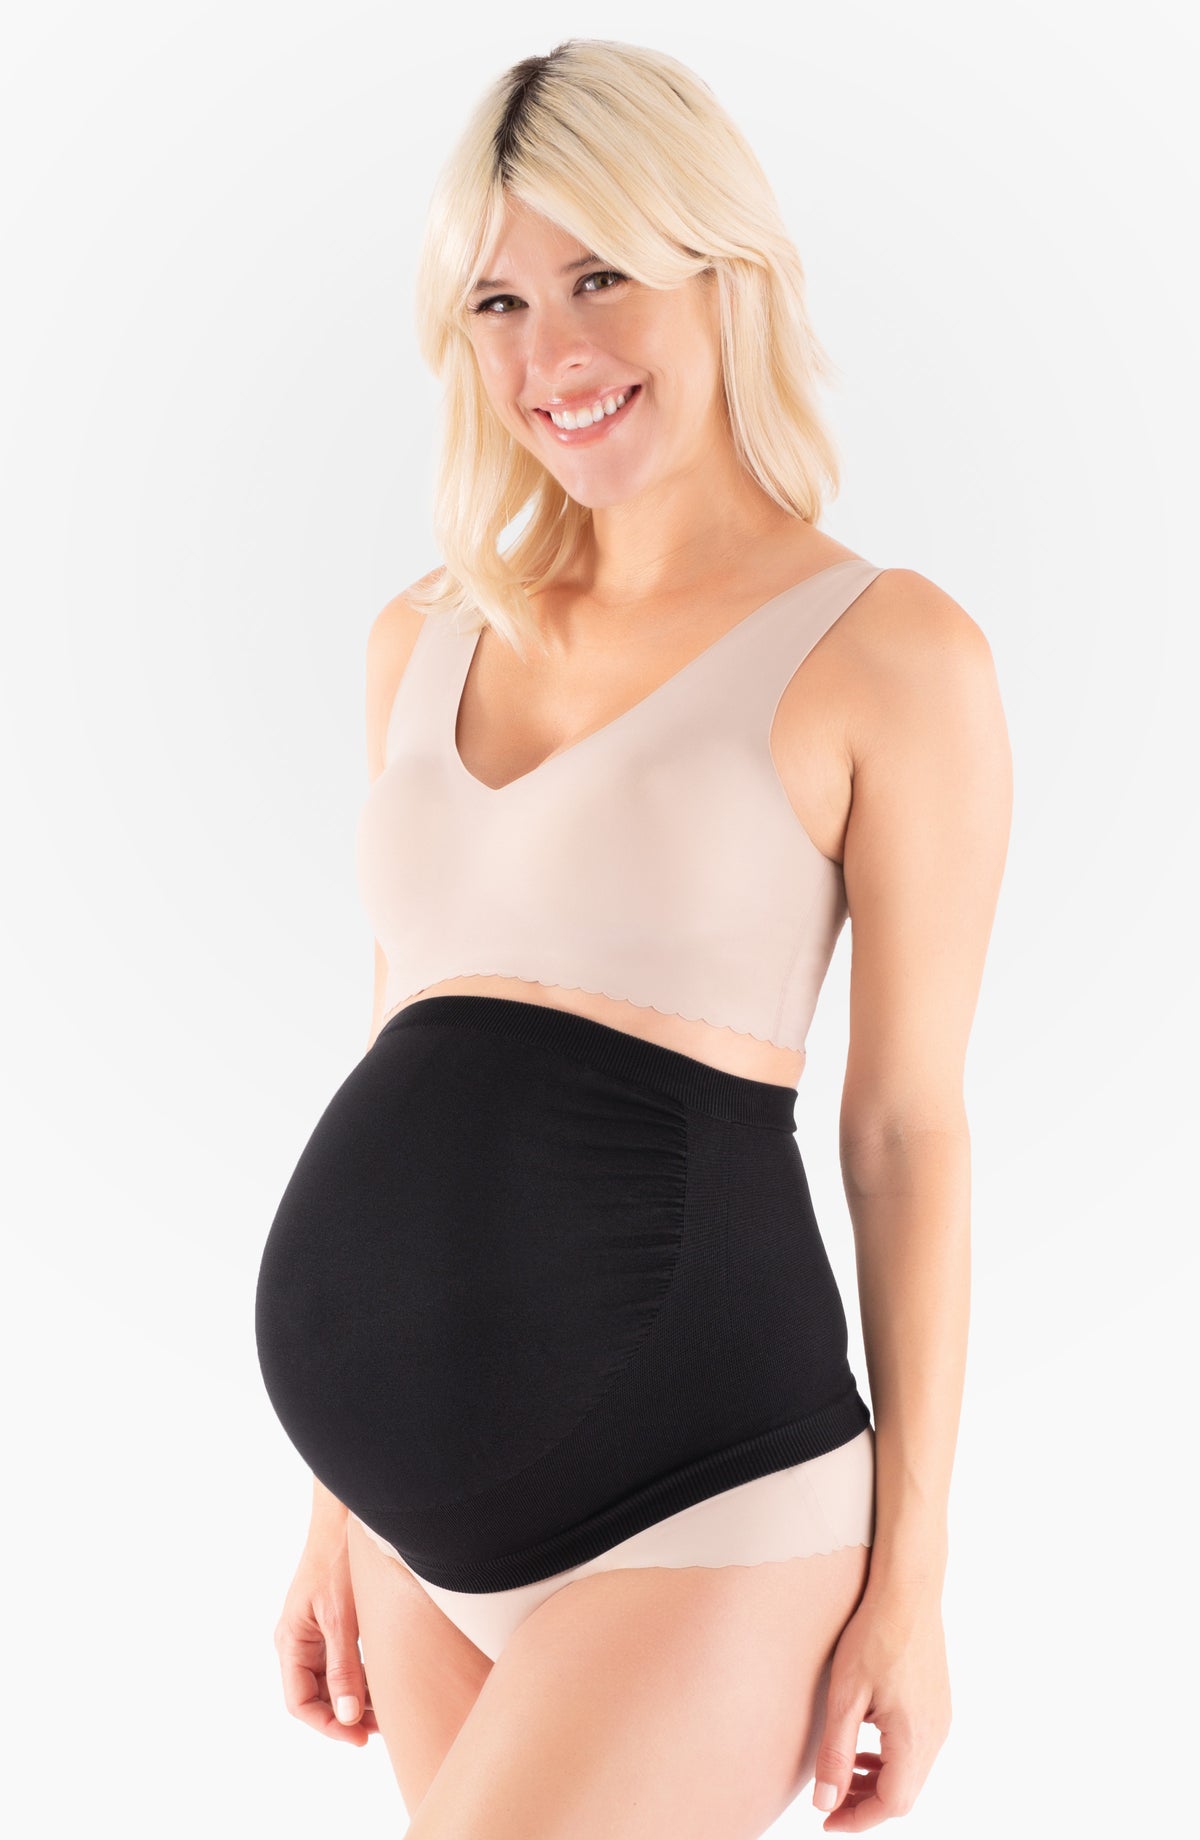 Discover The Best Maternity Belly Bands at Shop Proof – Belly Bandit